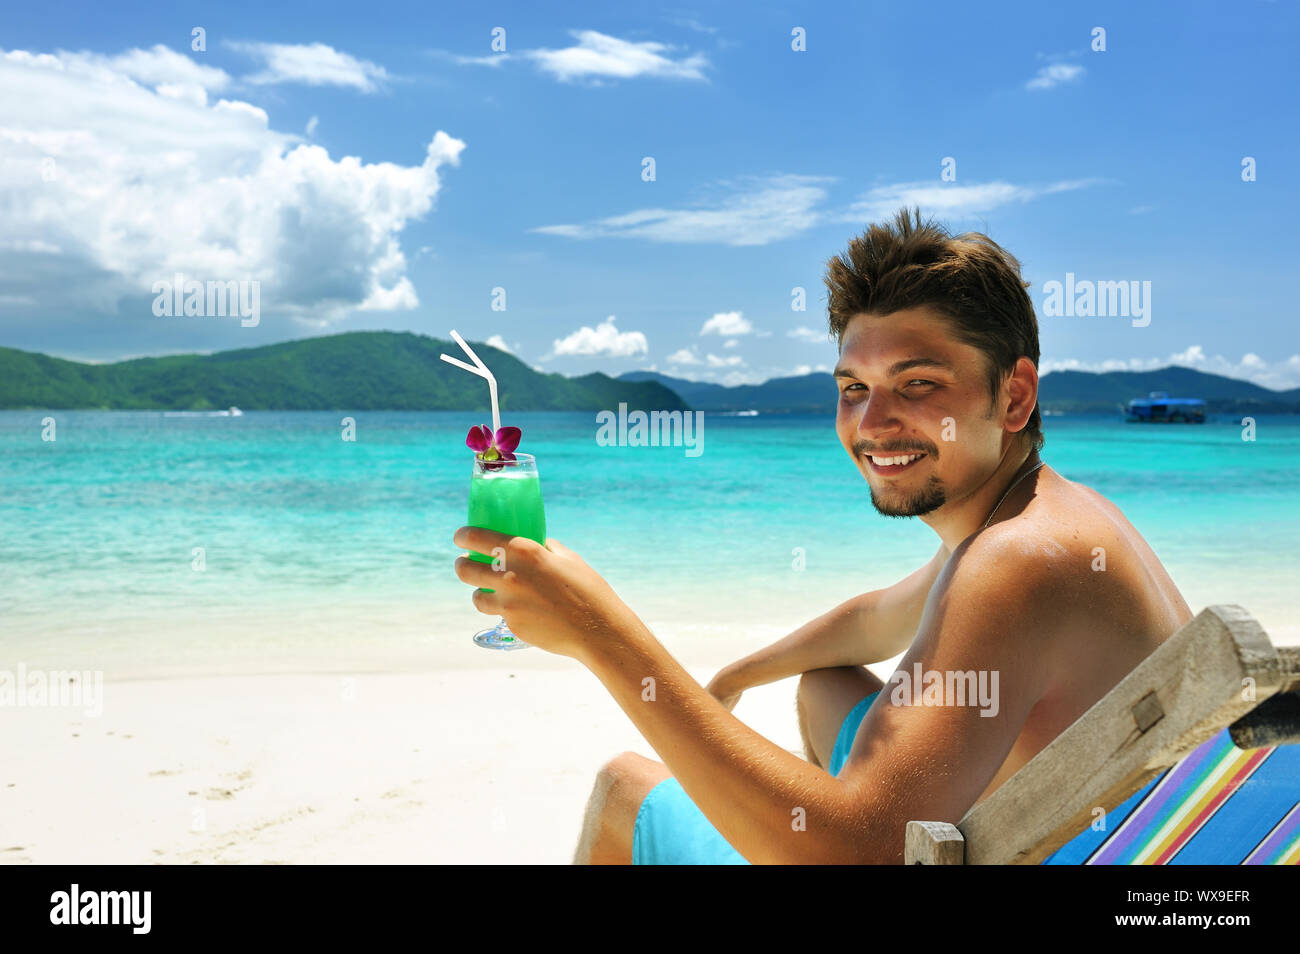 https://c8.alamy.com/comp/WX9EFR/man-on-a-beach-with-cocktail-WX9EFR.jpg